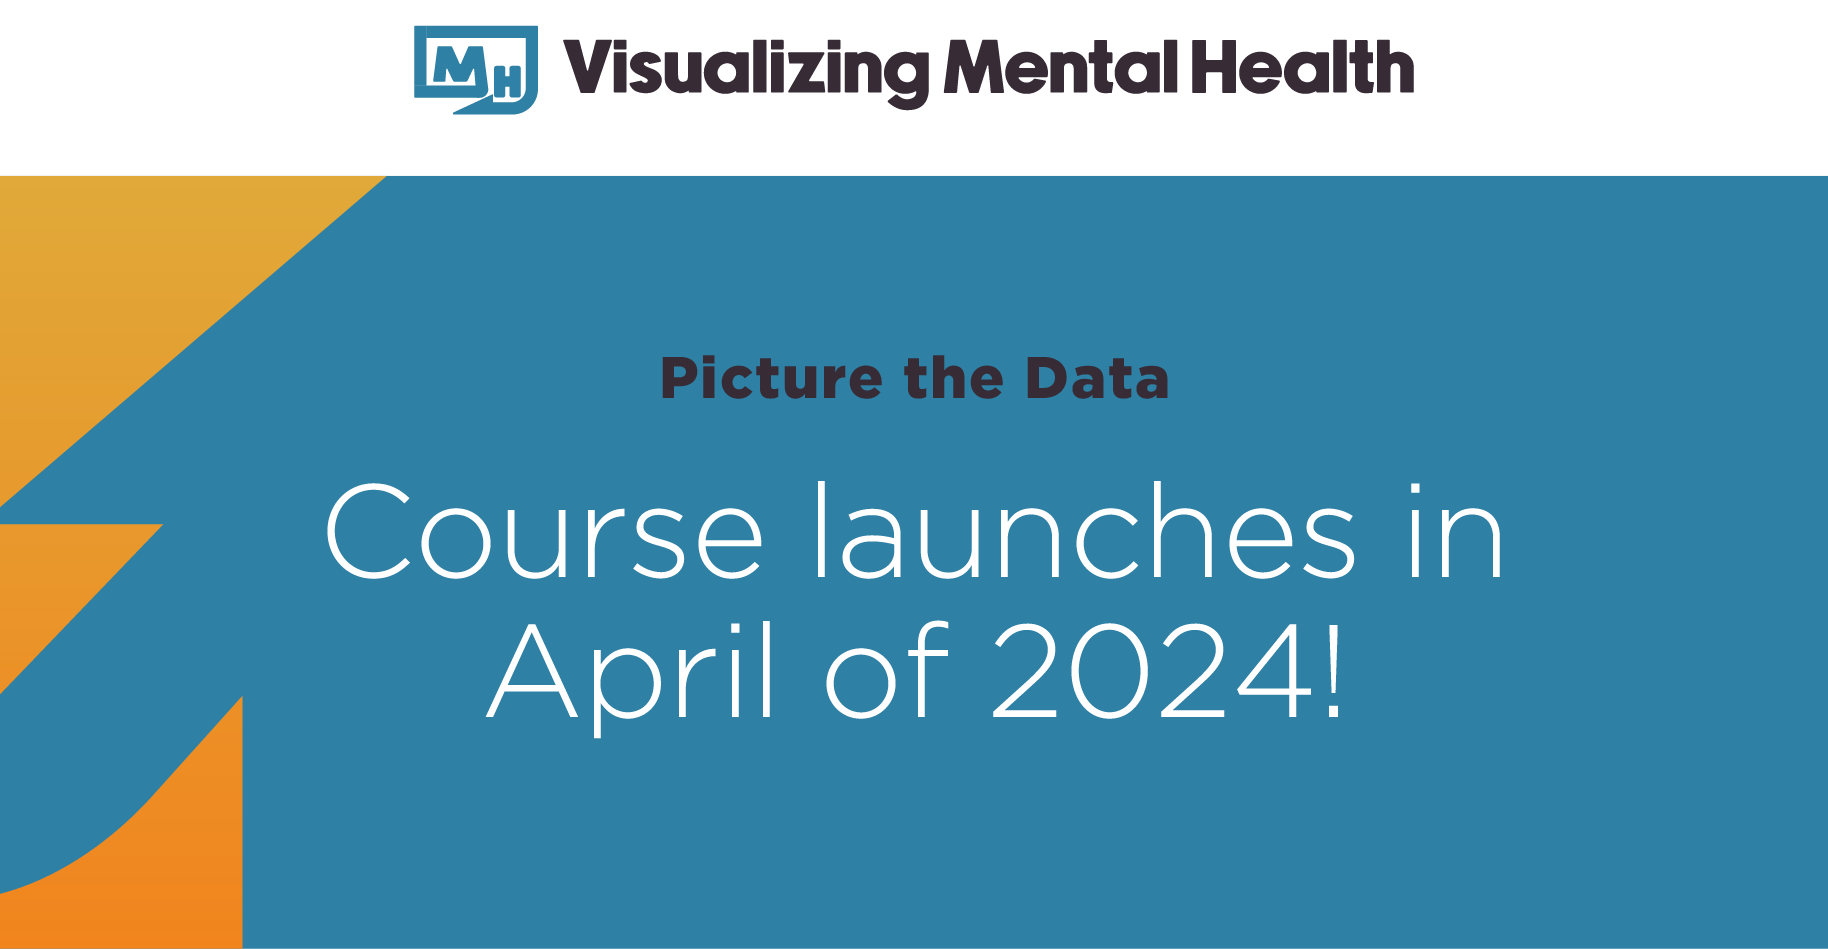 The Visualizing Mental Health course launches in April of 2024!